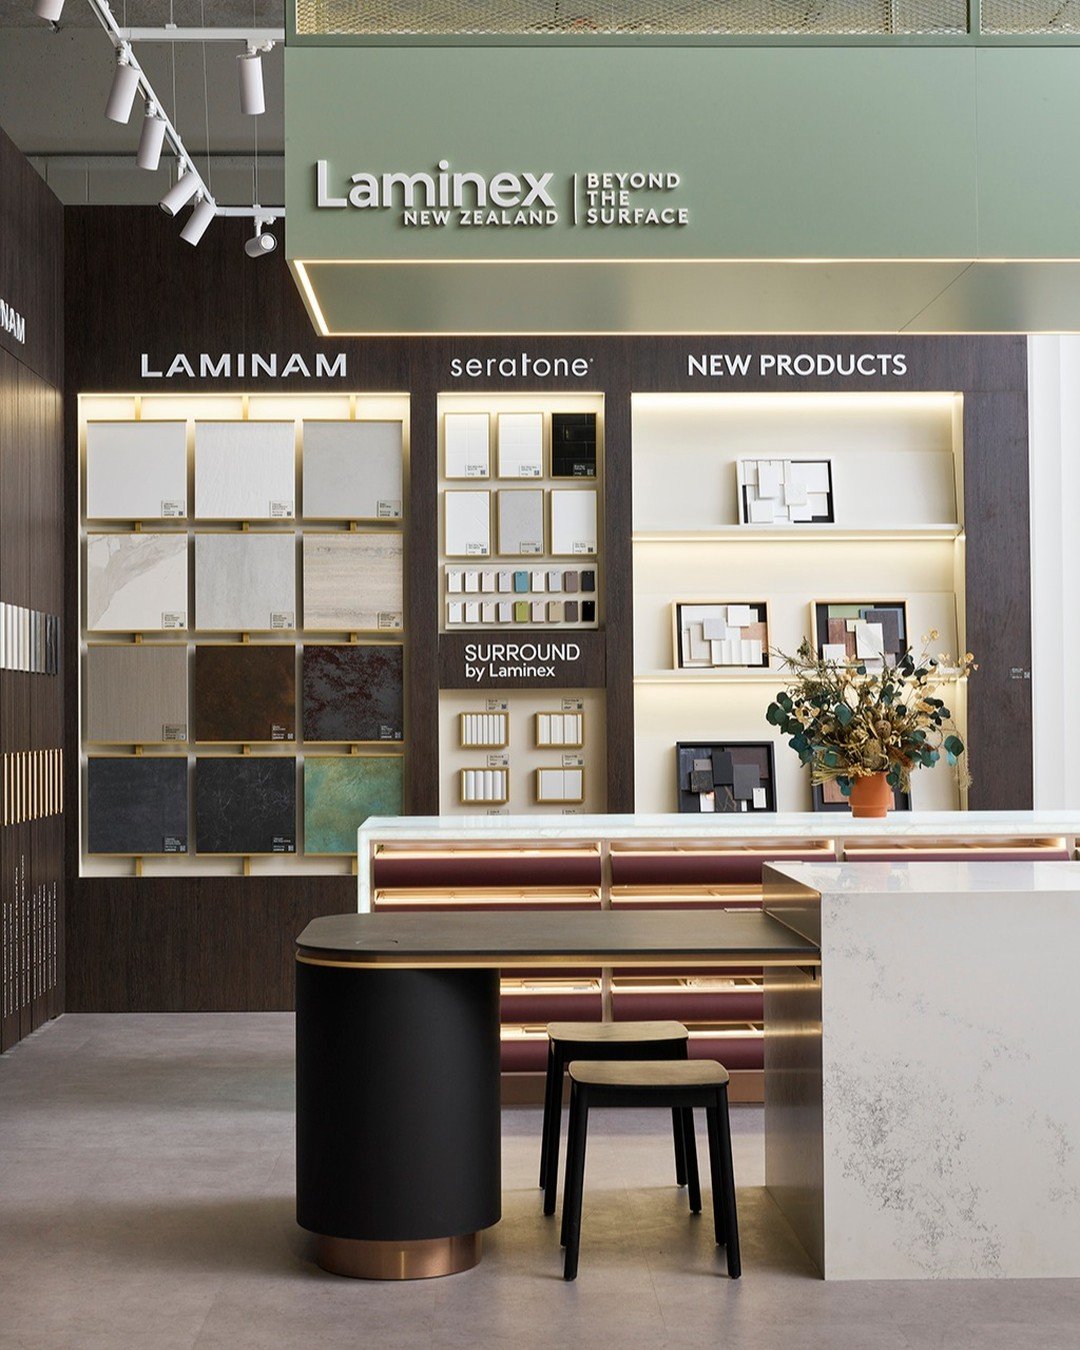 @laminexnz at Residium is your destination for selecting surface materials for interior design and architecture projects. 

Visitors can view hundreds of large format samples across the full suite of Laminex brands with take-home samples of Melteca a